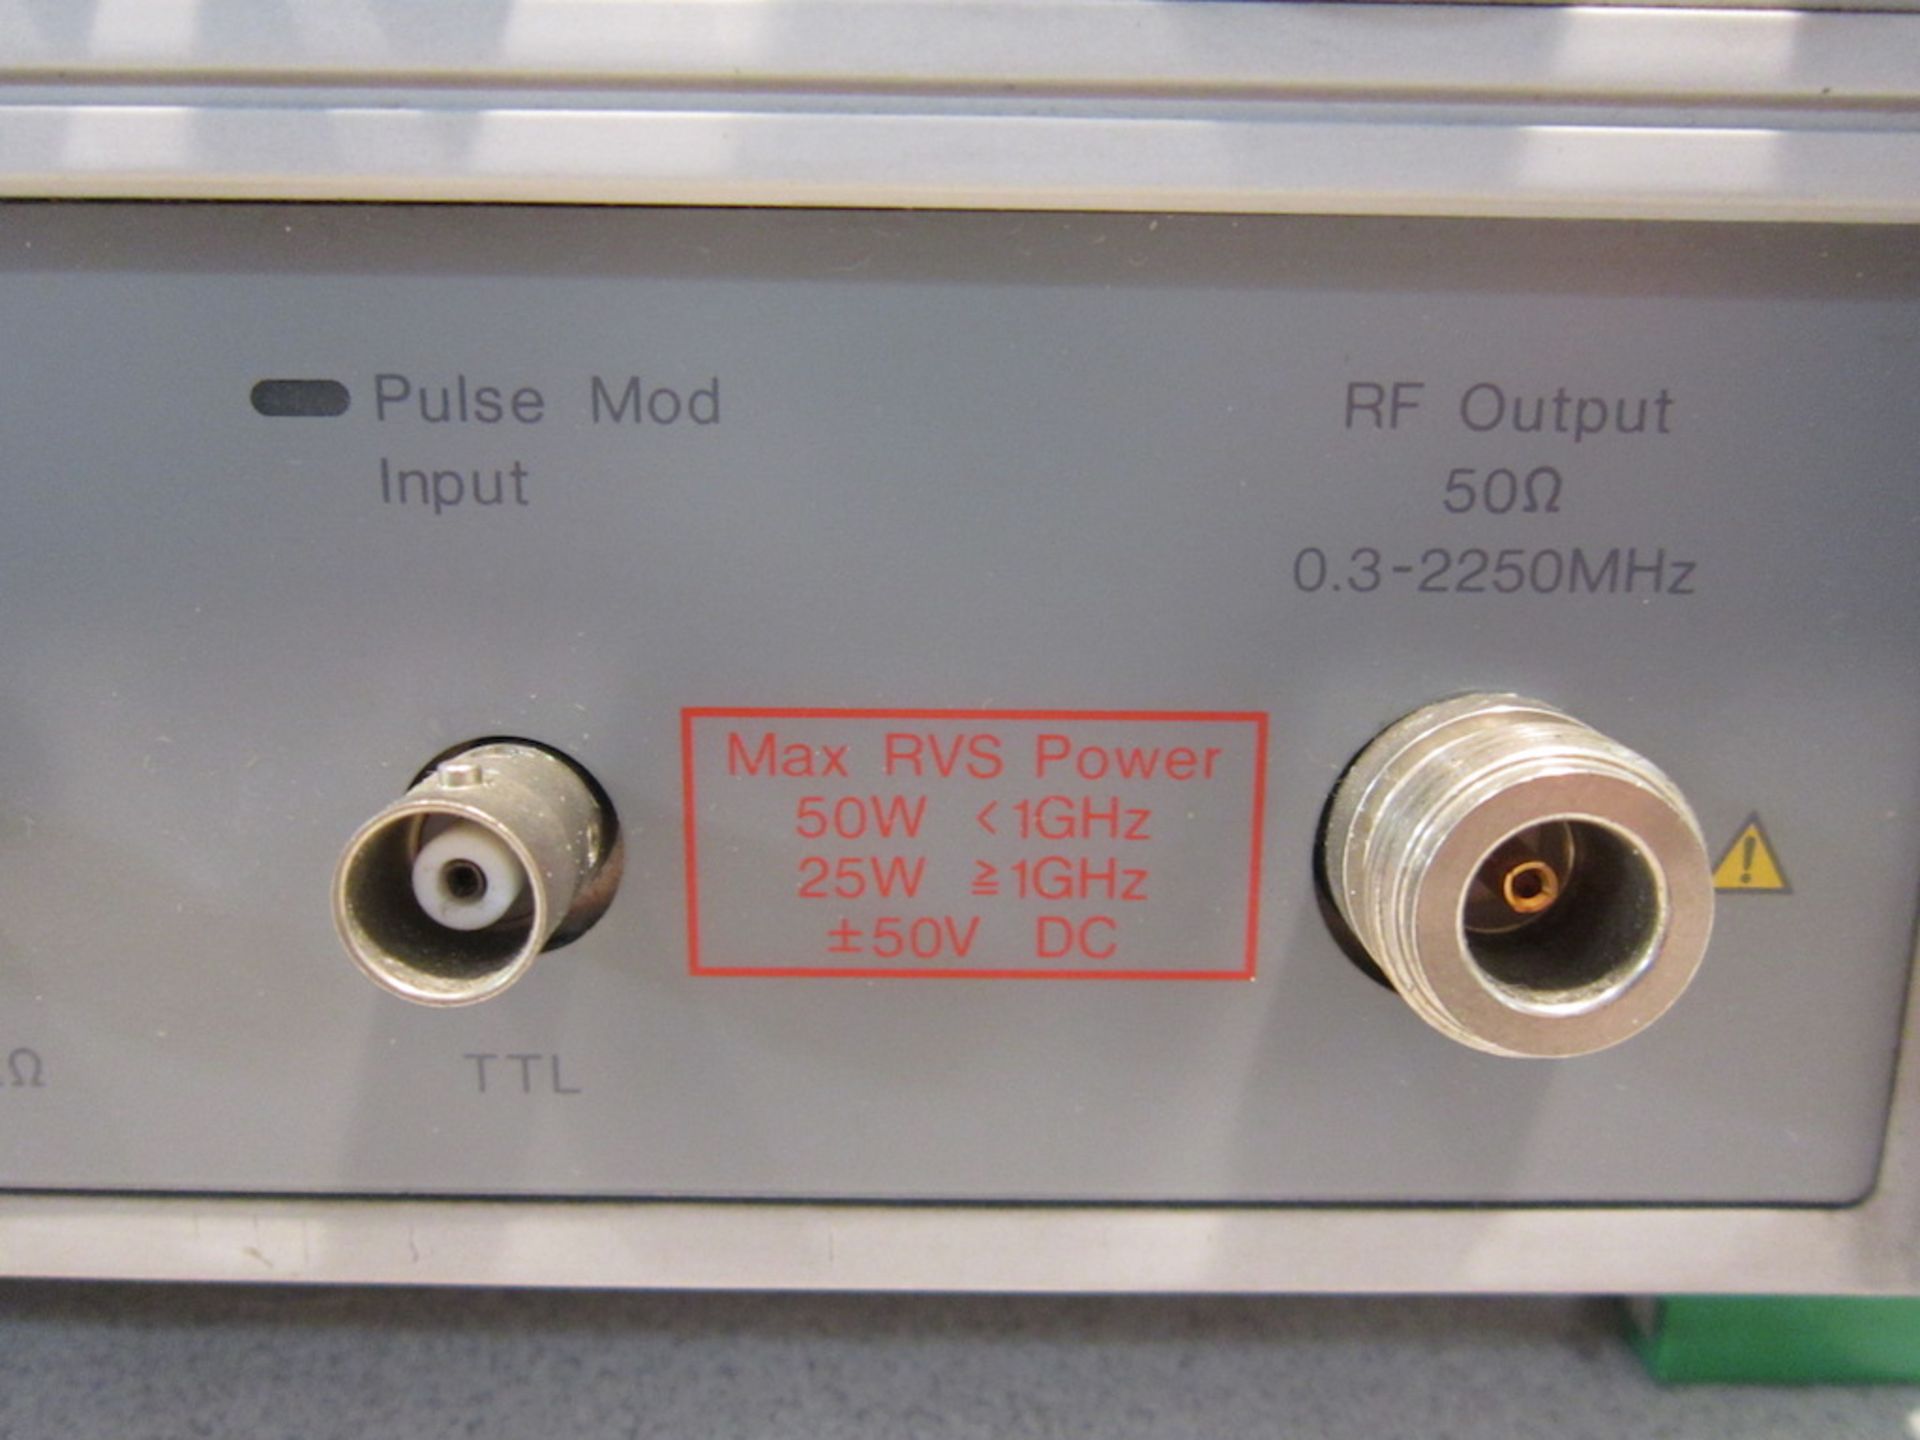 Anritsu Mg3670C Digital Modulation Signal Generator. one unit used for pictures serial numbers - Image 7 of 9